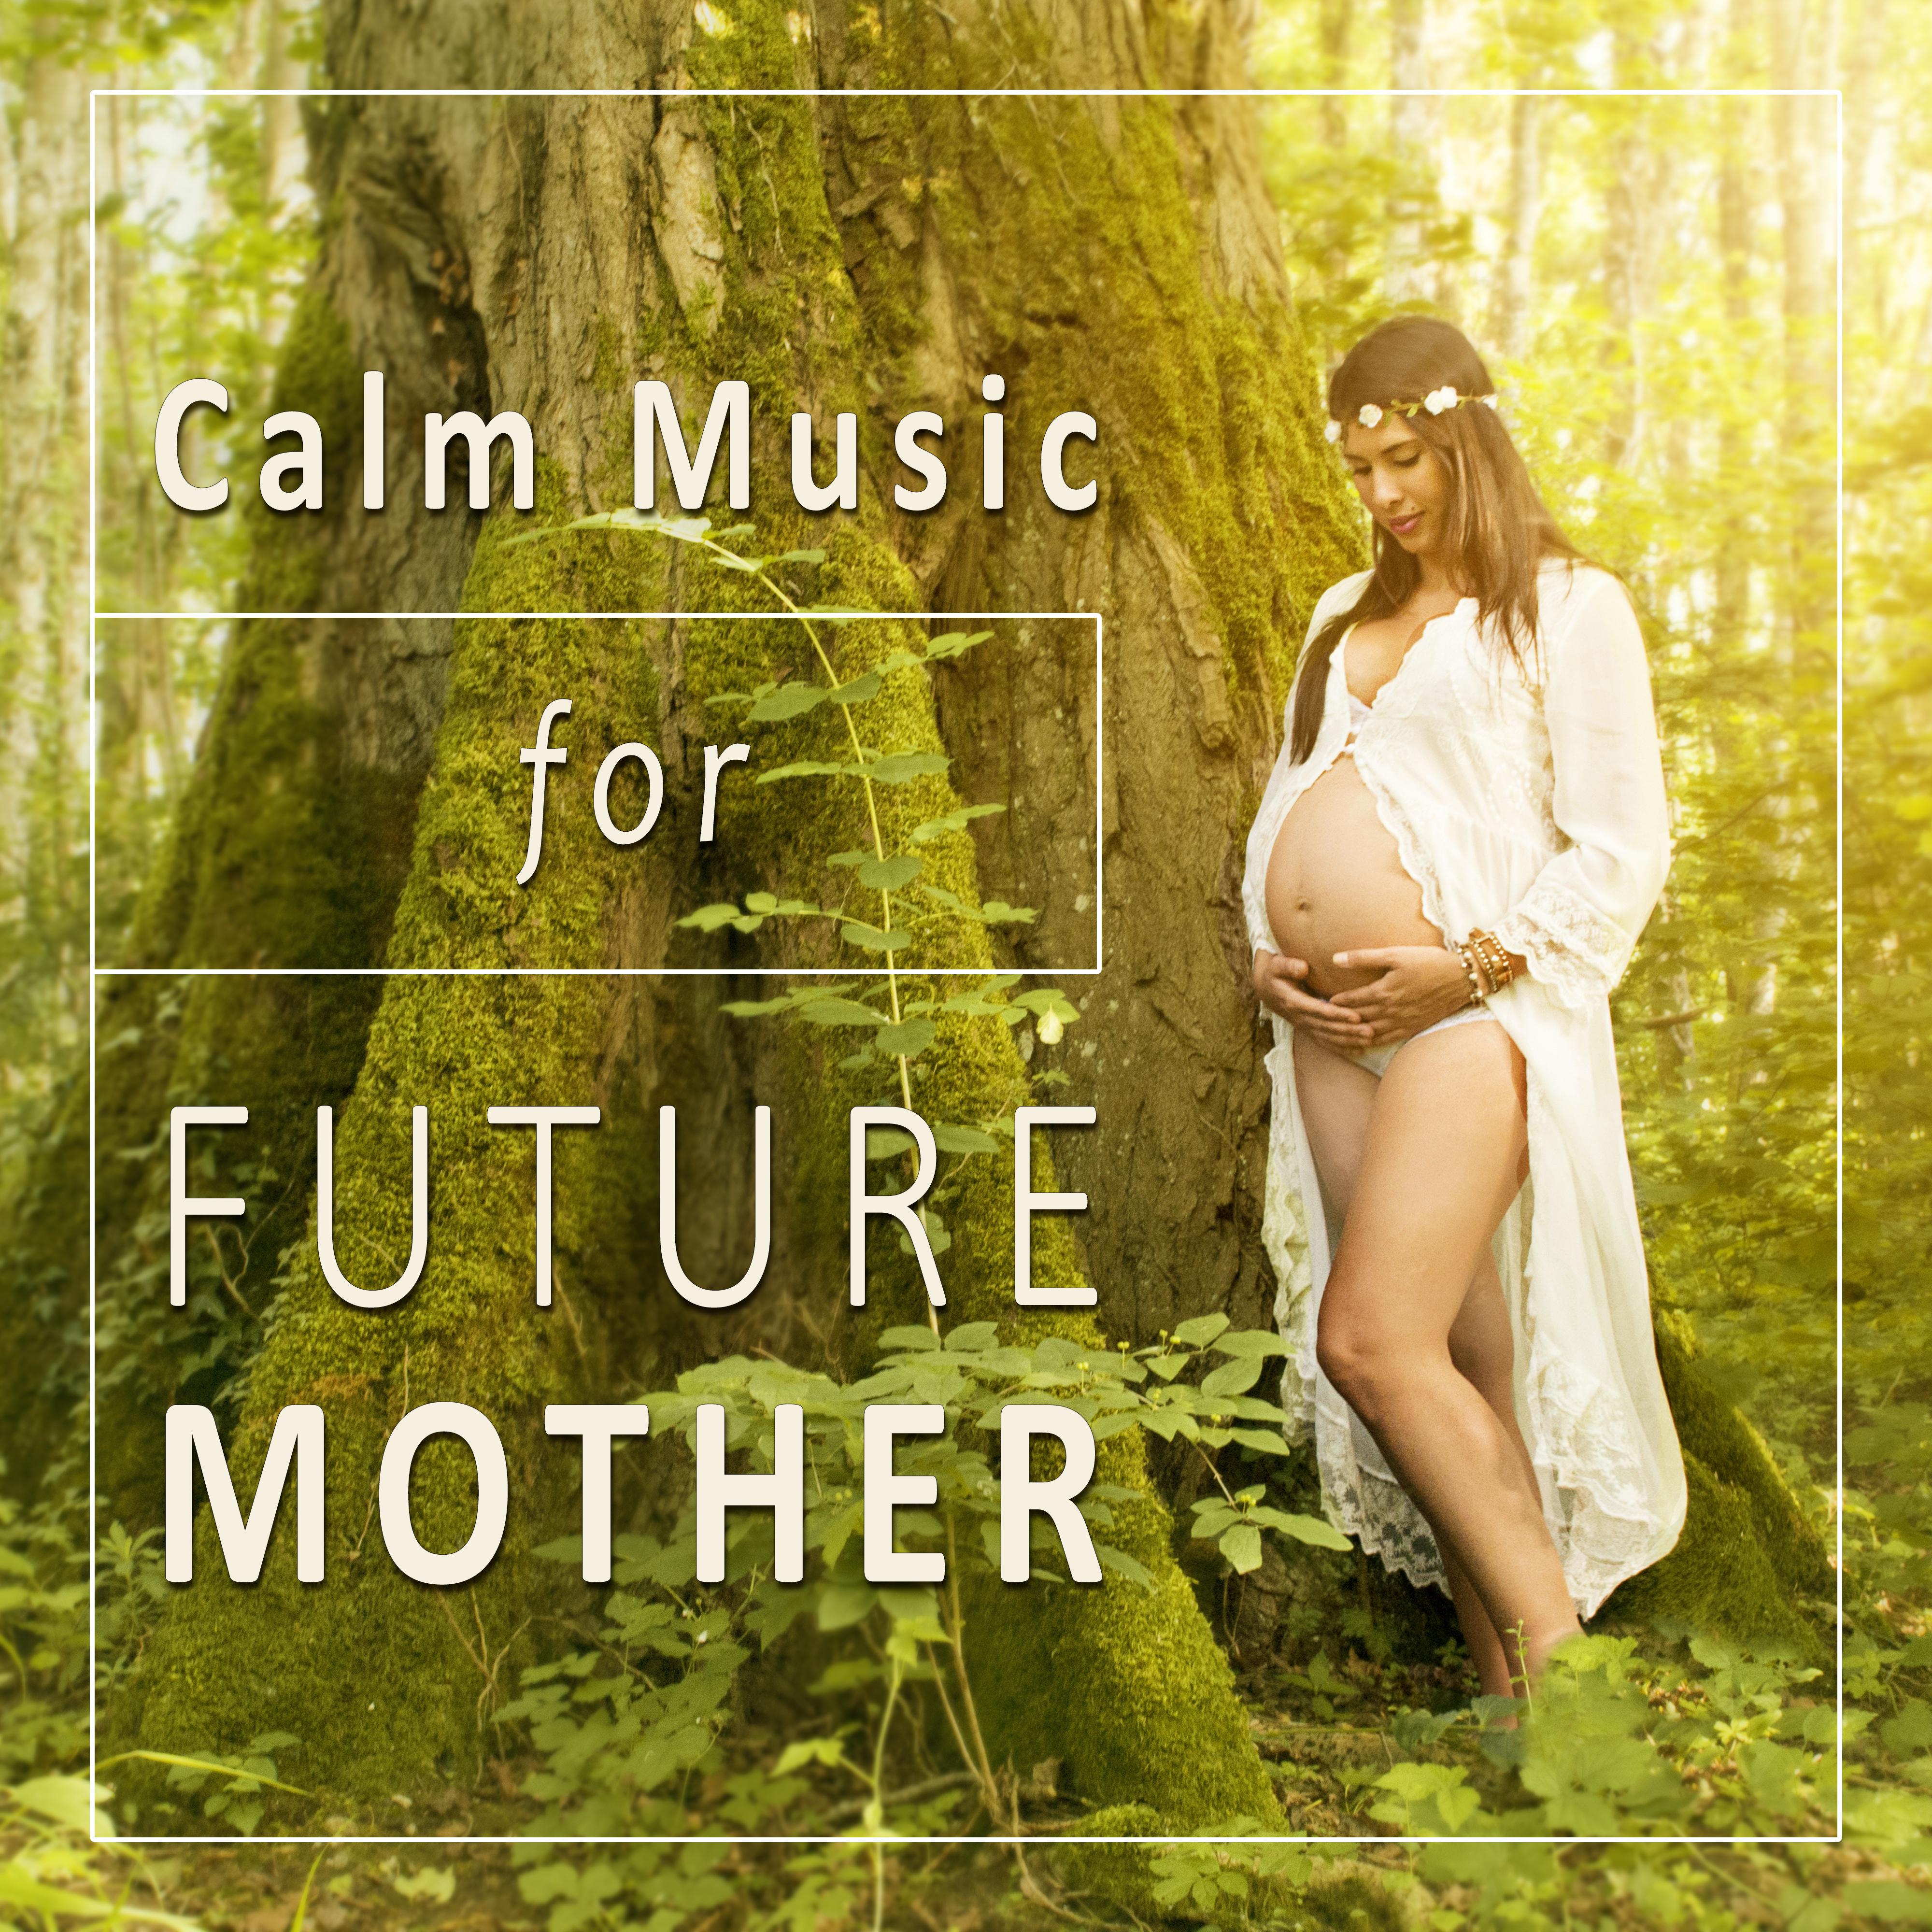 Calm Music for Future Mother - Pregnancy Relaxation,Pregnancy Yoga,Pregnancy Meditation,Prenatal Meditation